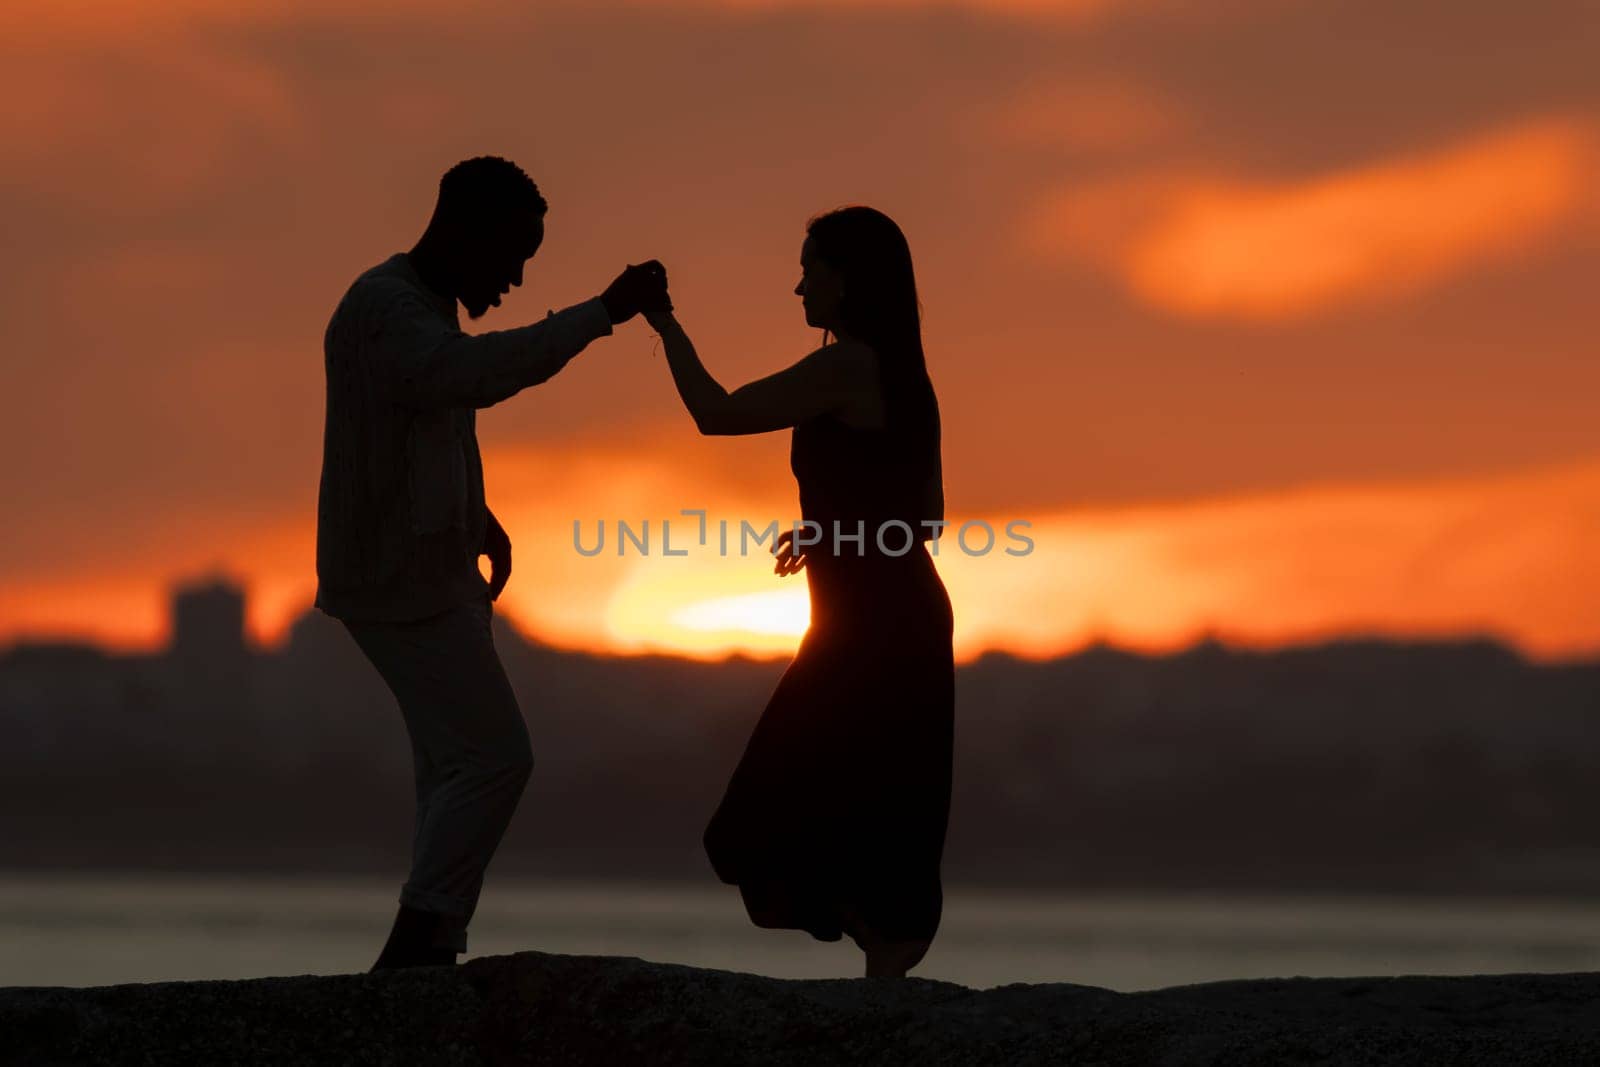 A couple dancing in the sunset. The man is wearing a white shirt and the woman is wearing a black dress